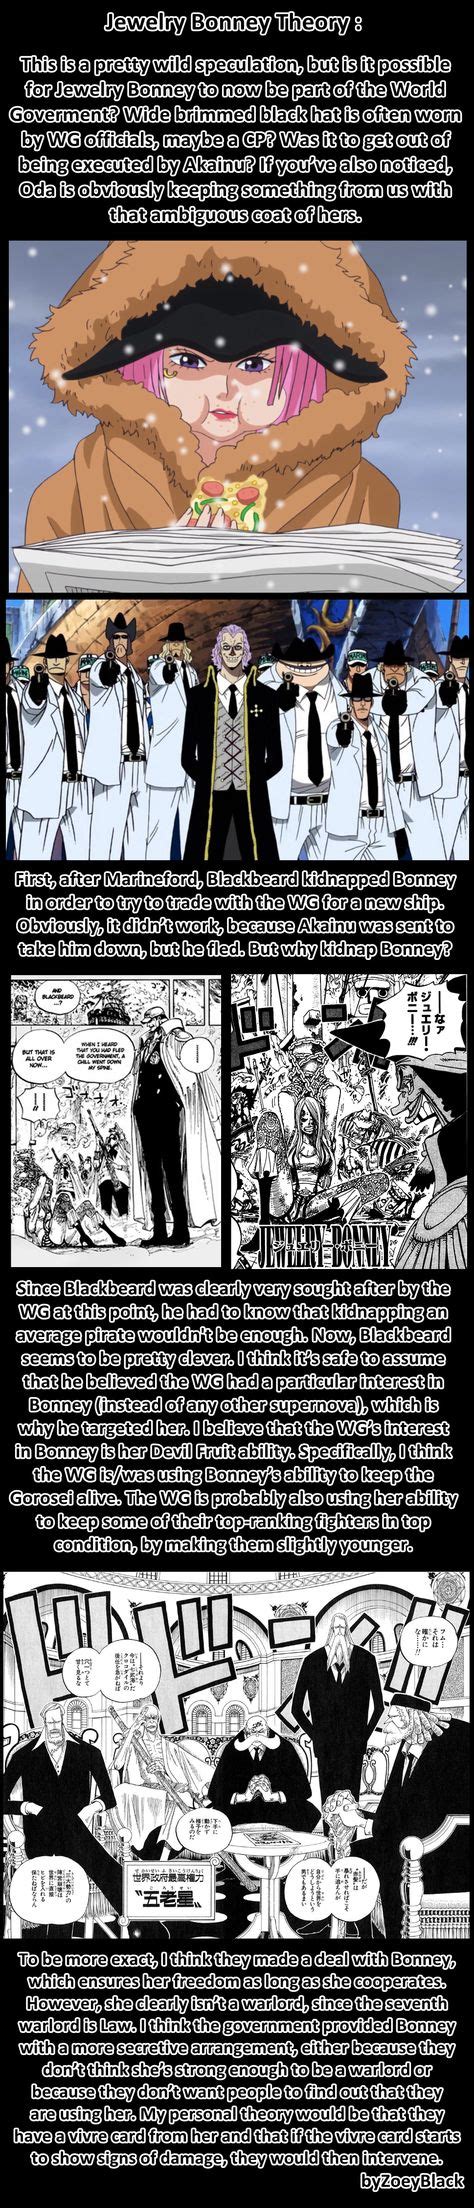 17 Best One Piece Theories Images One Piece Theories One Piece One